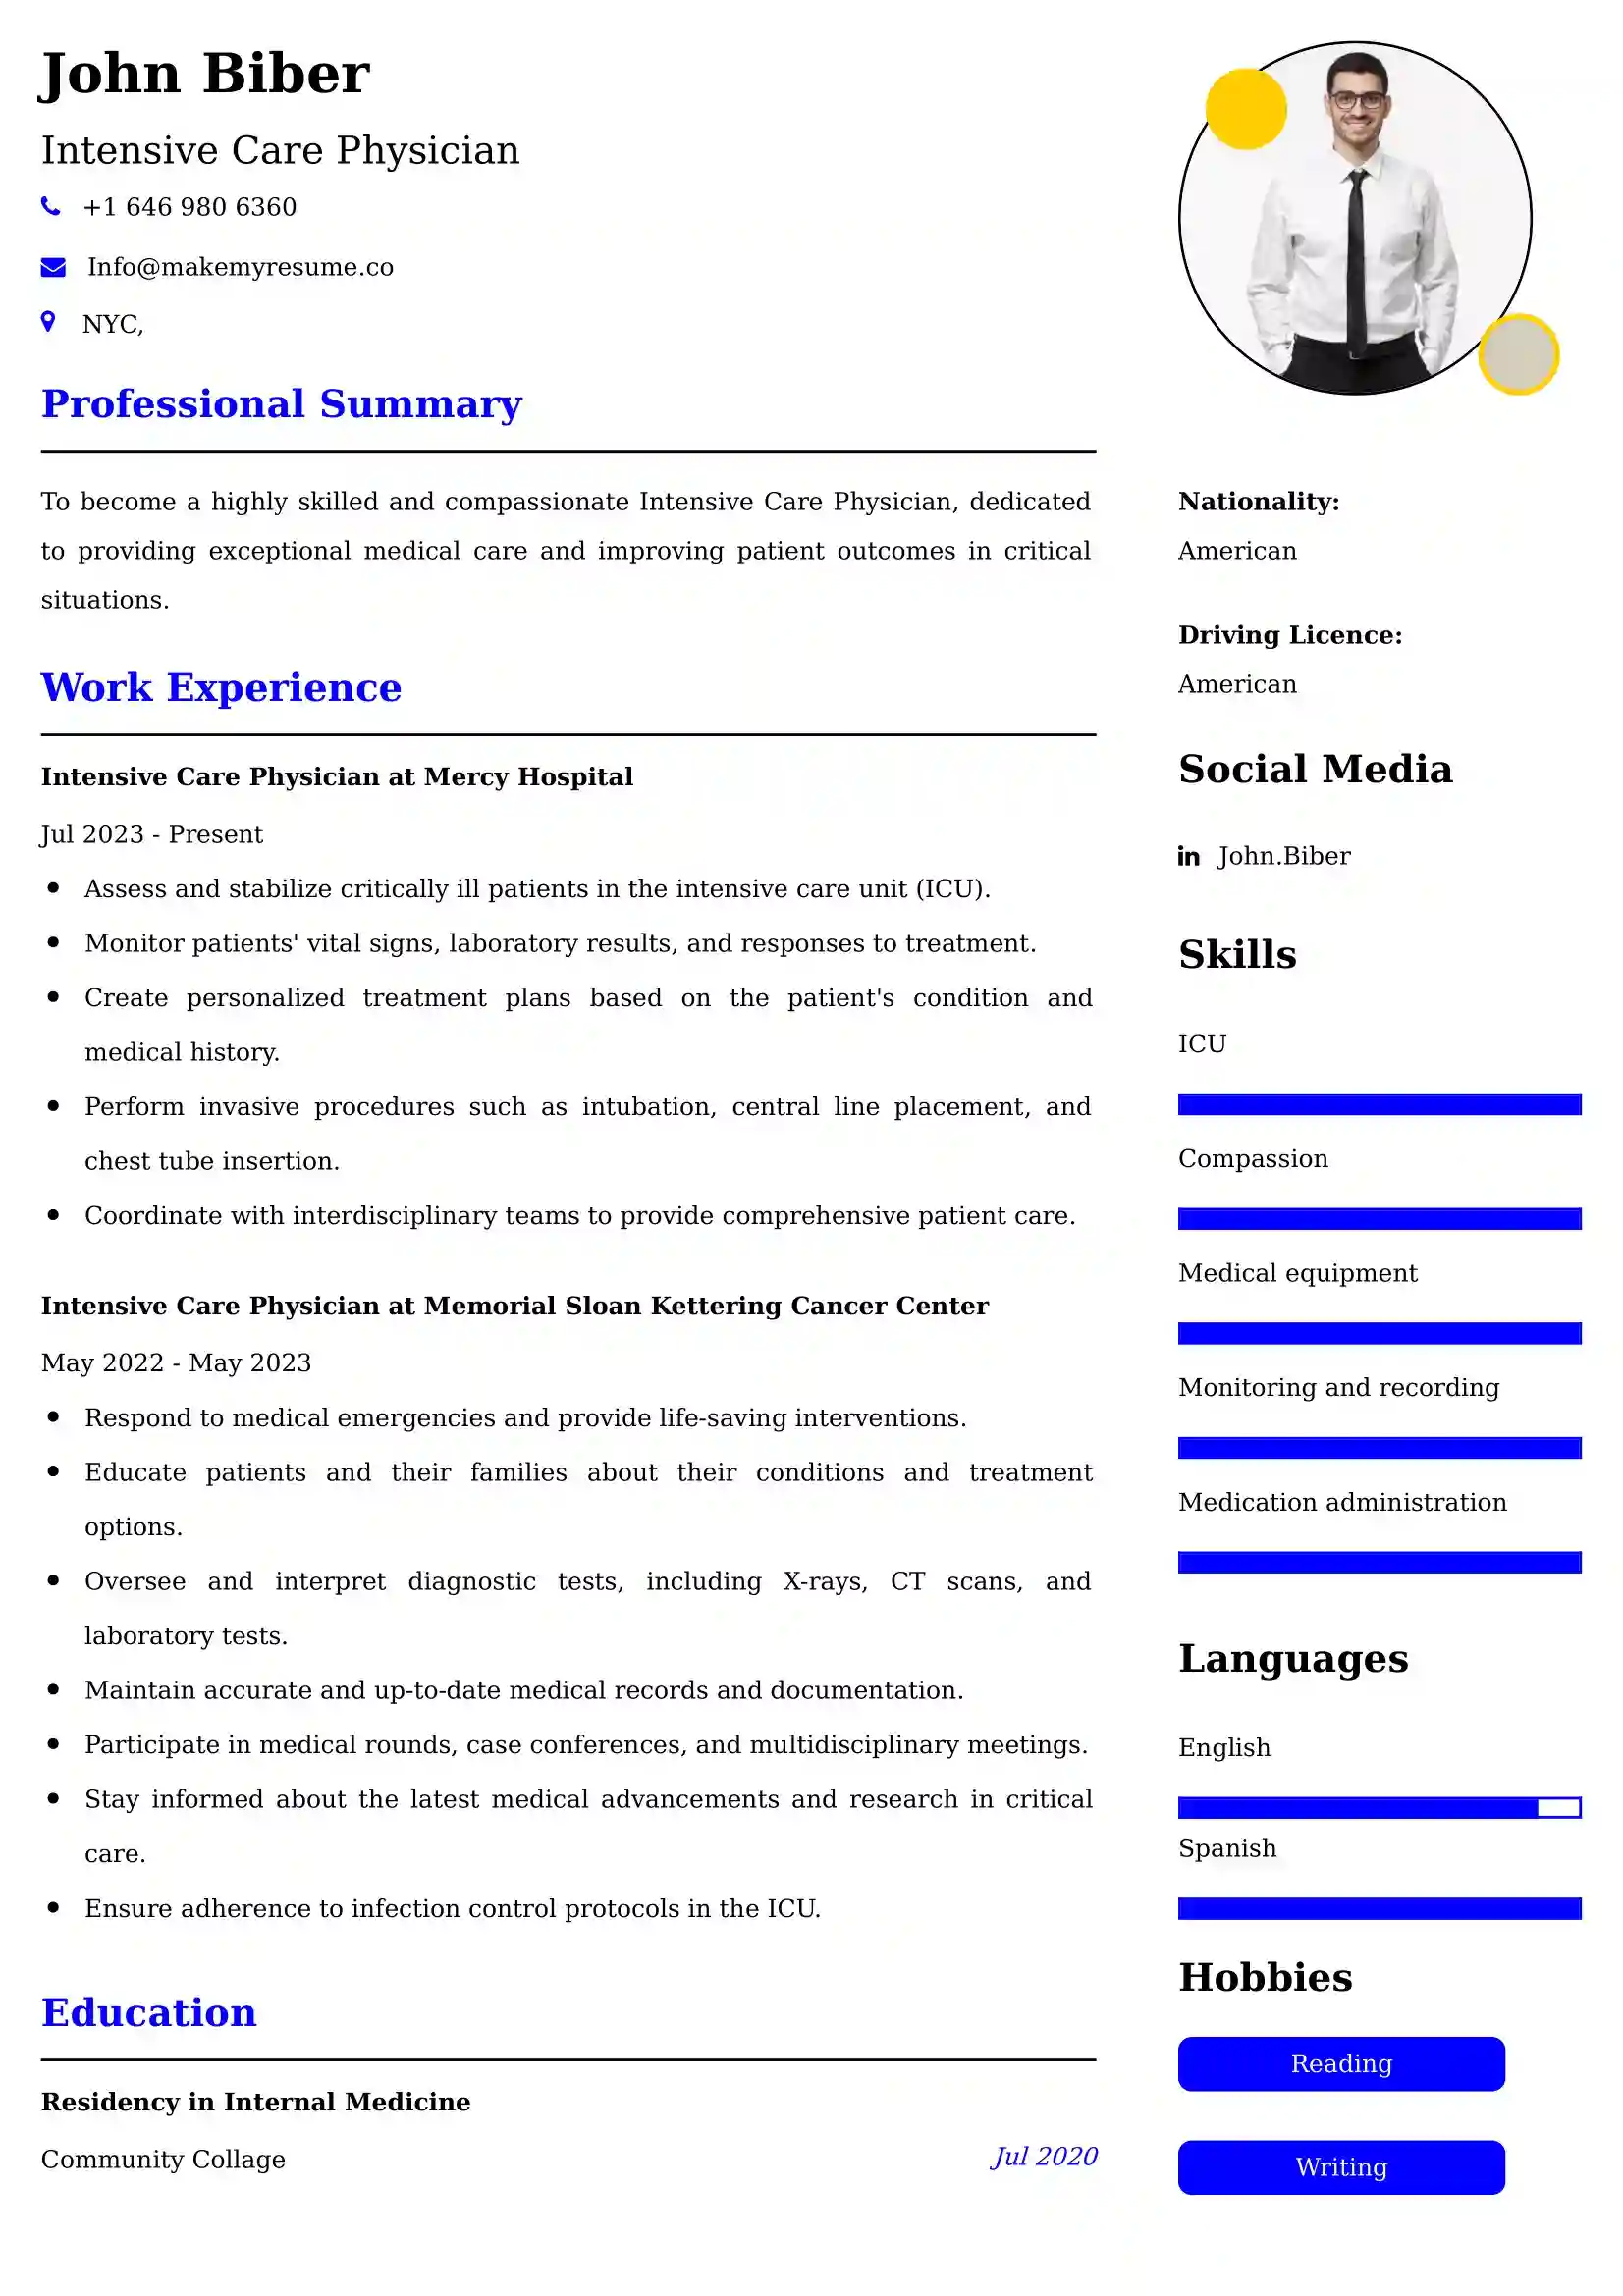 Intensive Care Physician Resume Examples - Brazilian Format, Latest Template